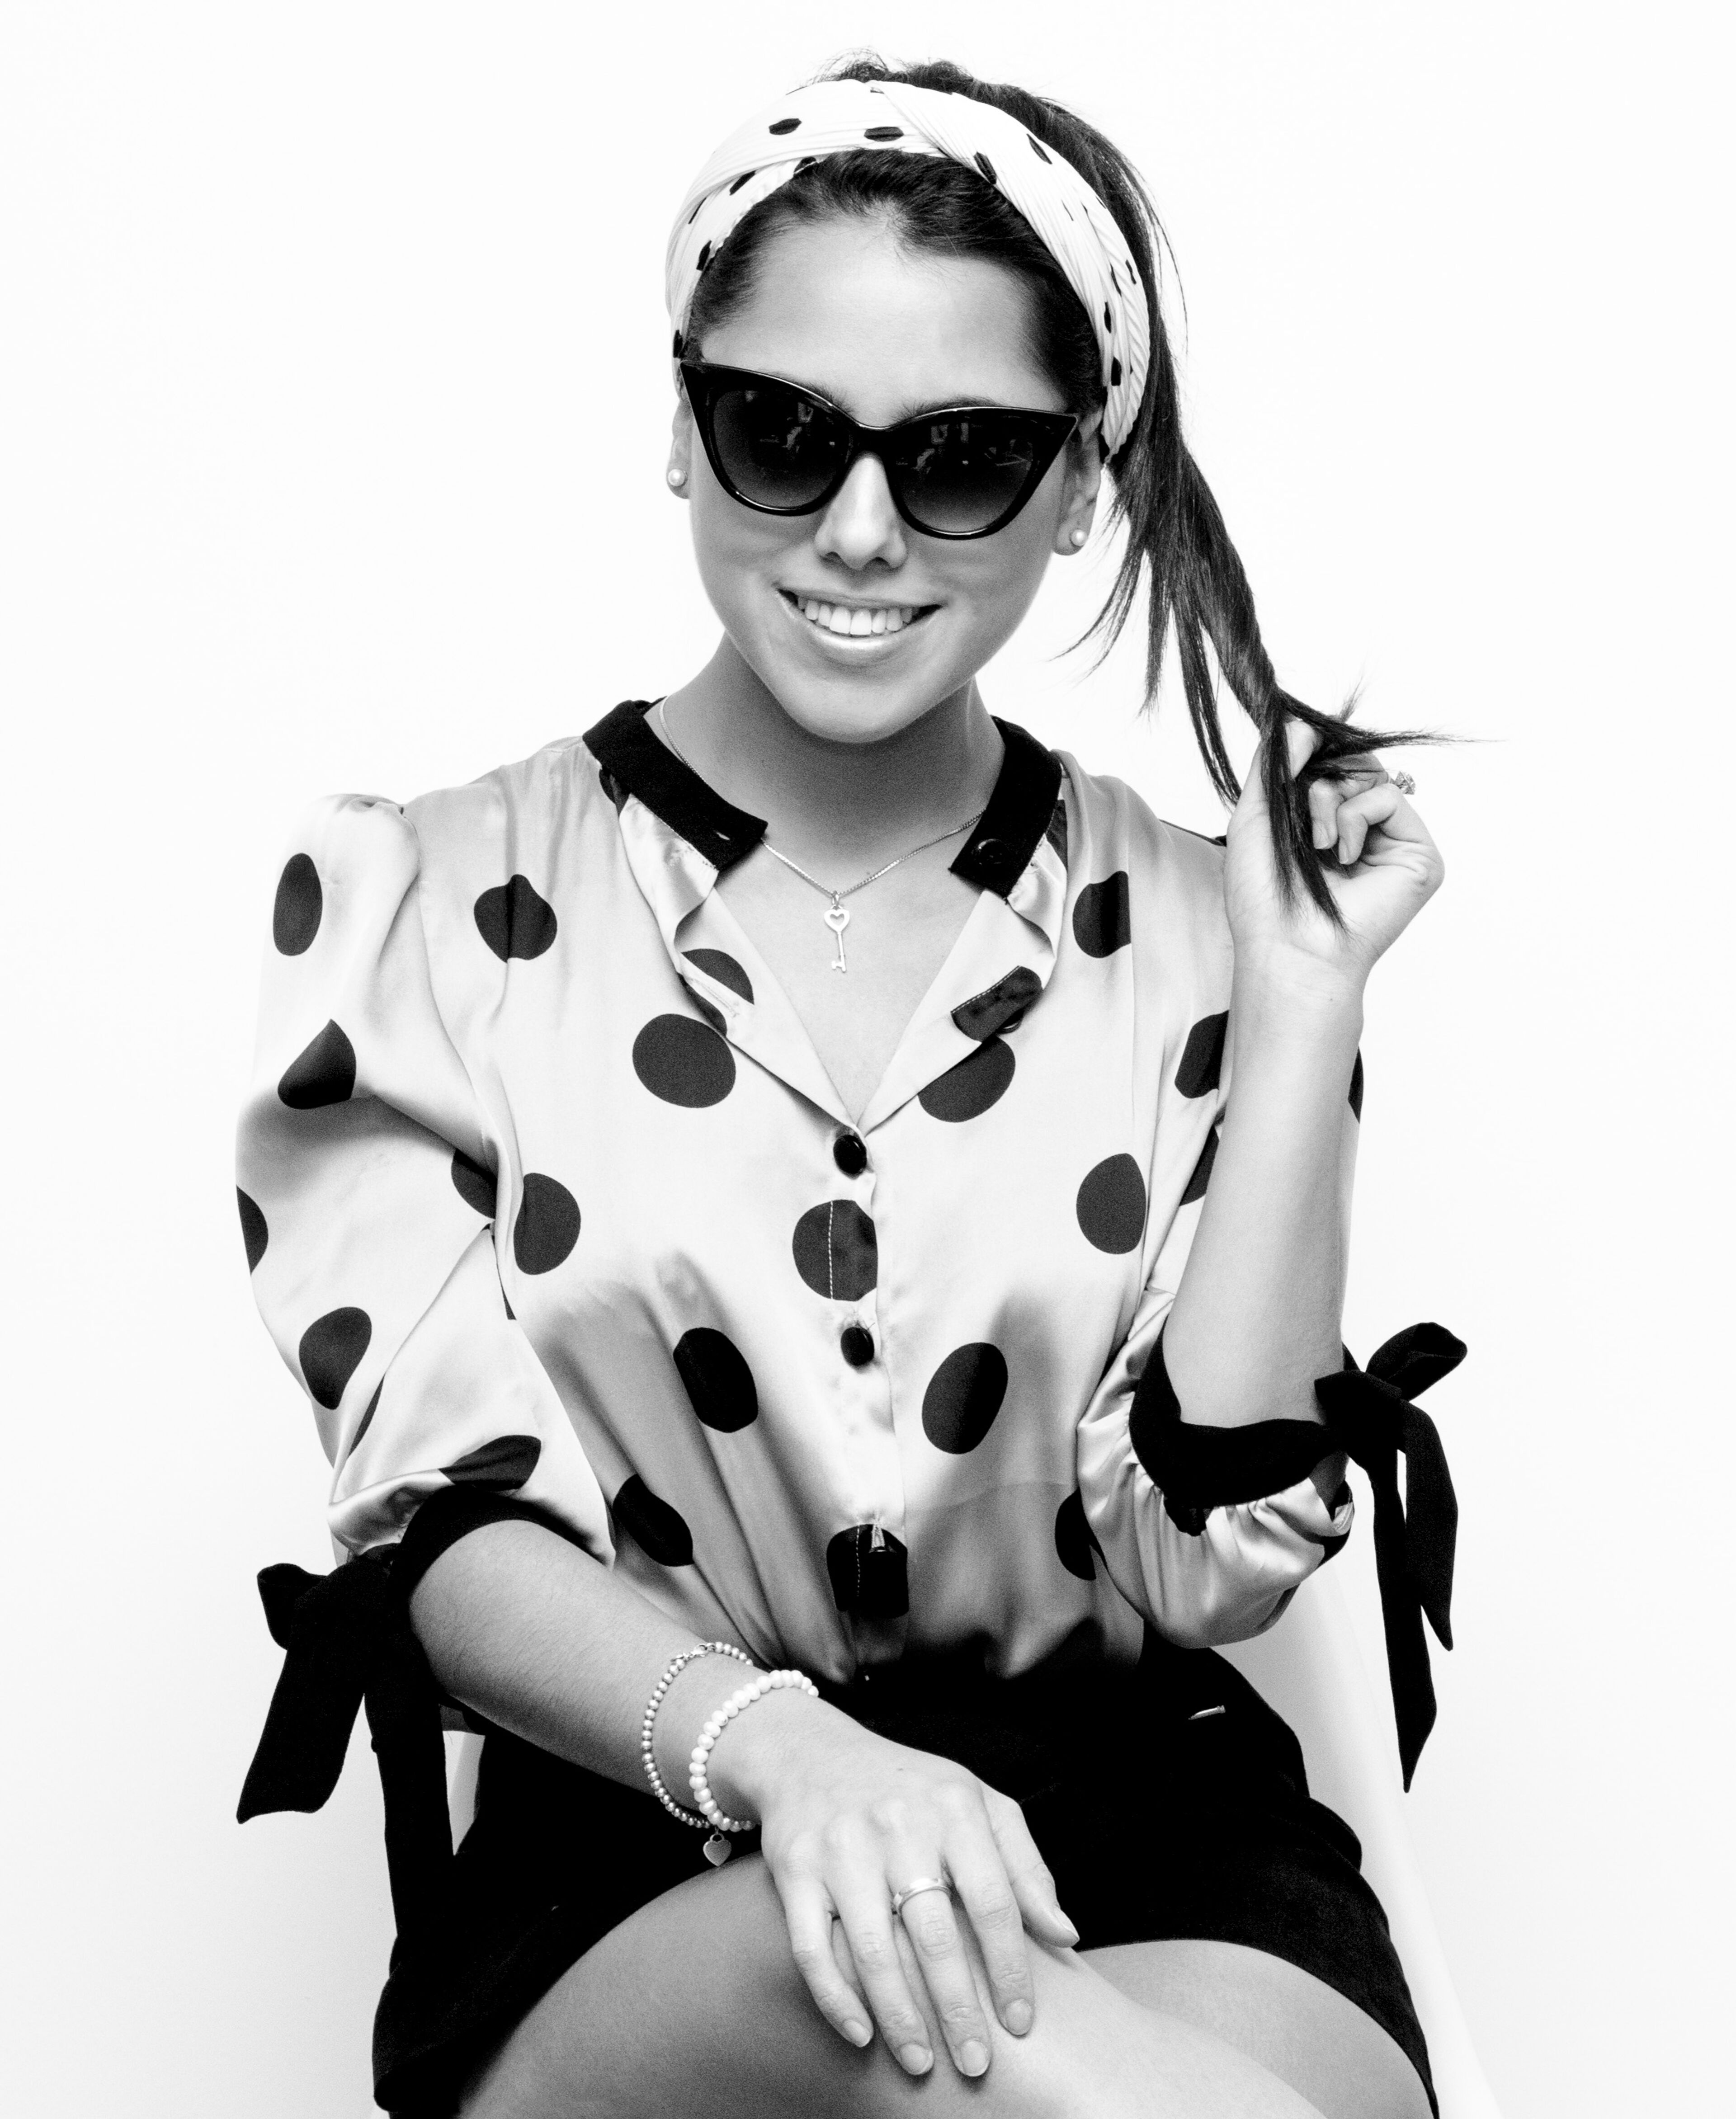 A cheerful woman in a polka-dotted blouse, accessorized with sunglasses, a headscarf, and jewelry, poses playfully in a black and white photo.